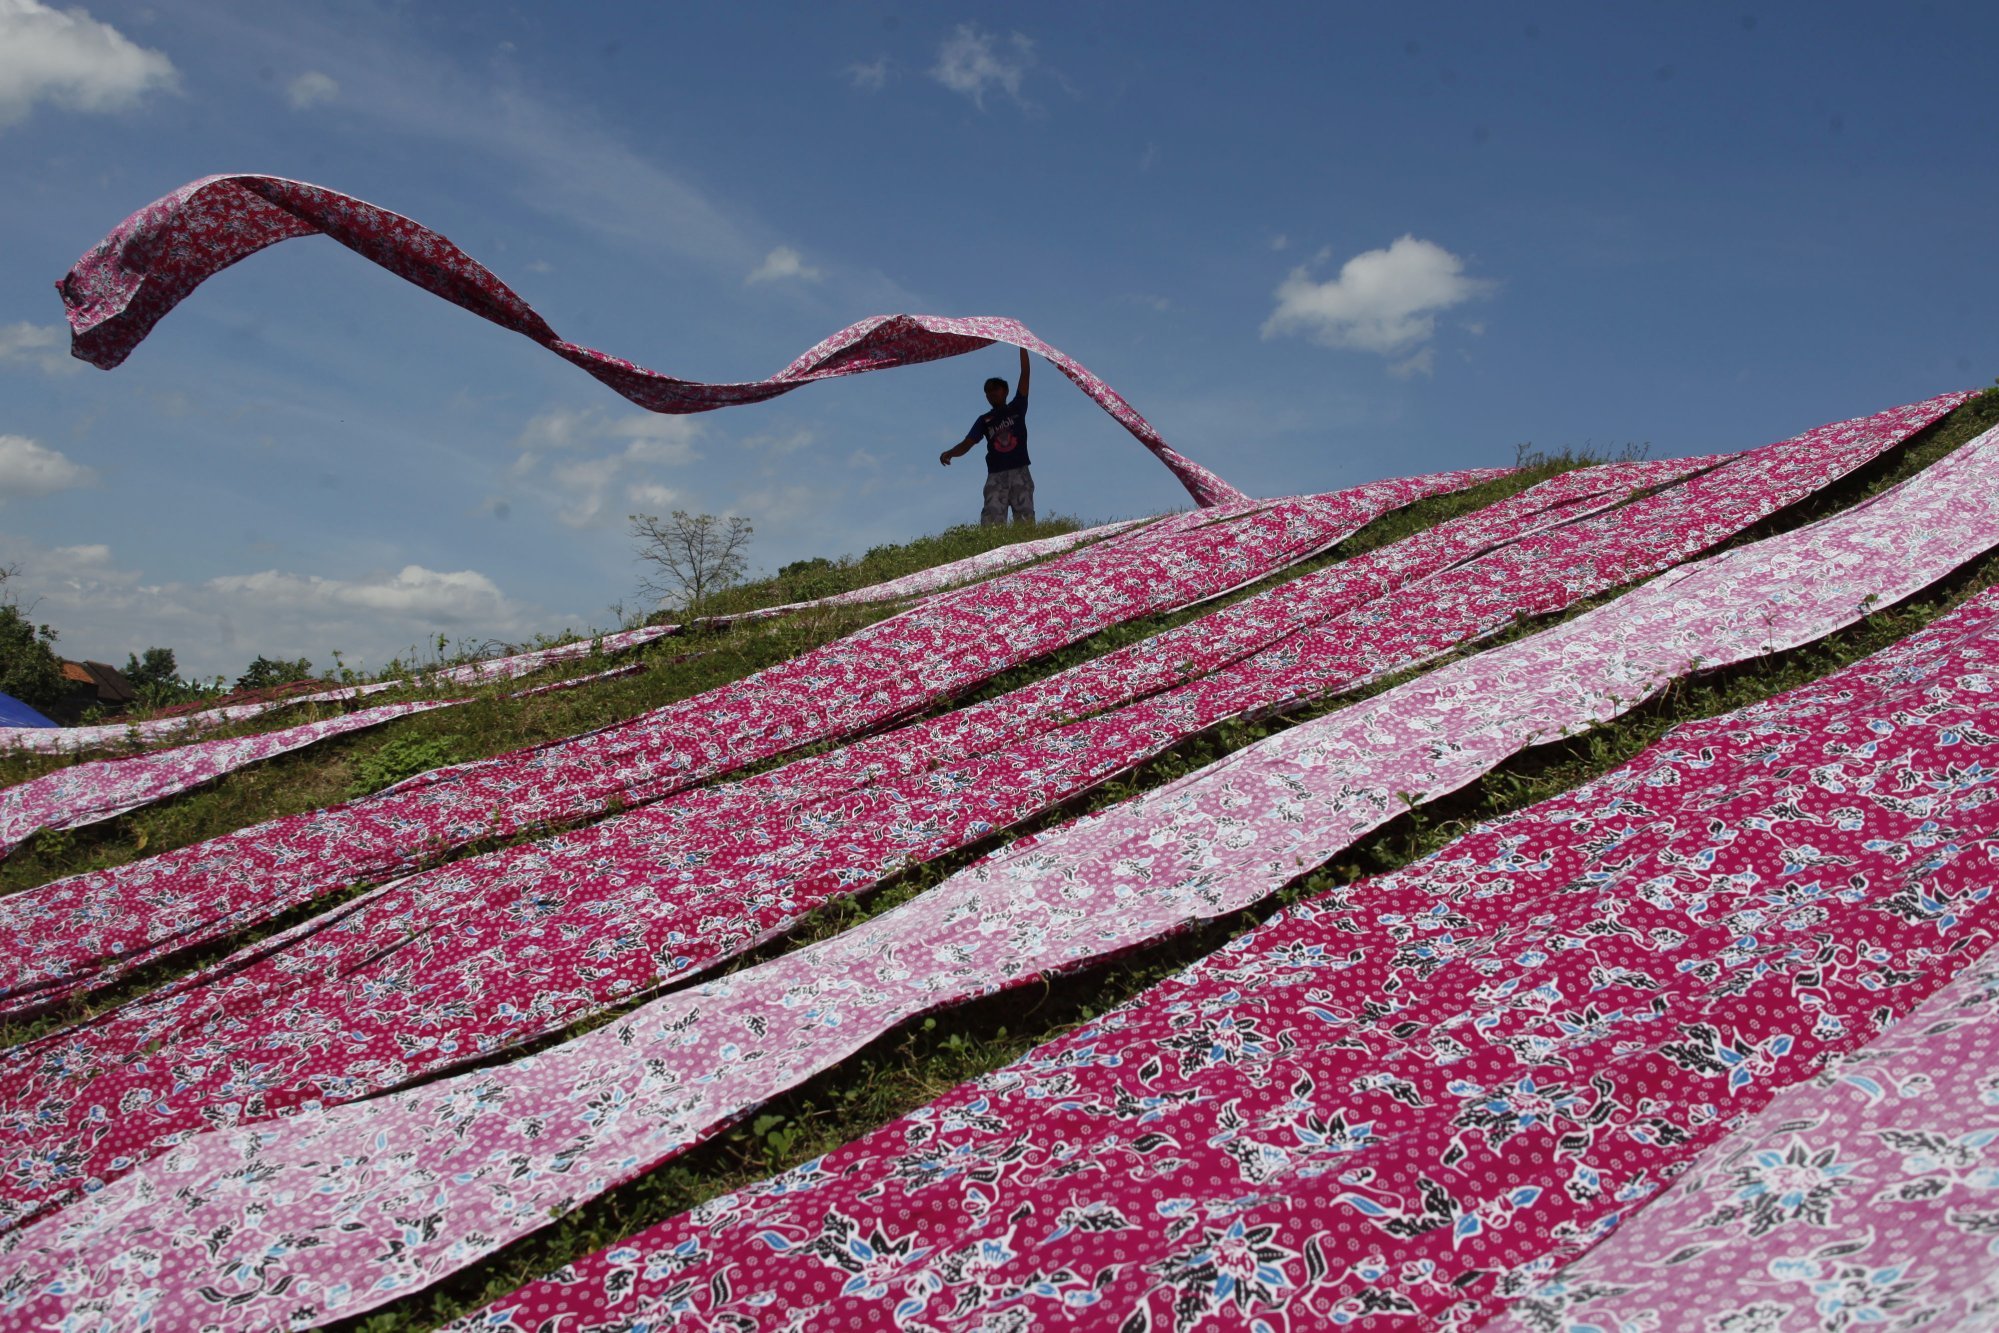 An employee throws batik fabric in an industrial area in Sukoharjo, Central Java province, Indonesia in July 2021. Photo: Antara Foto via Reuters